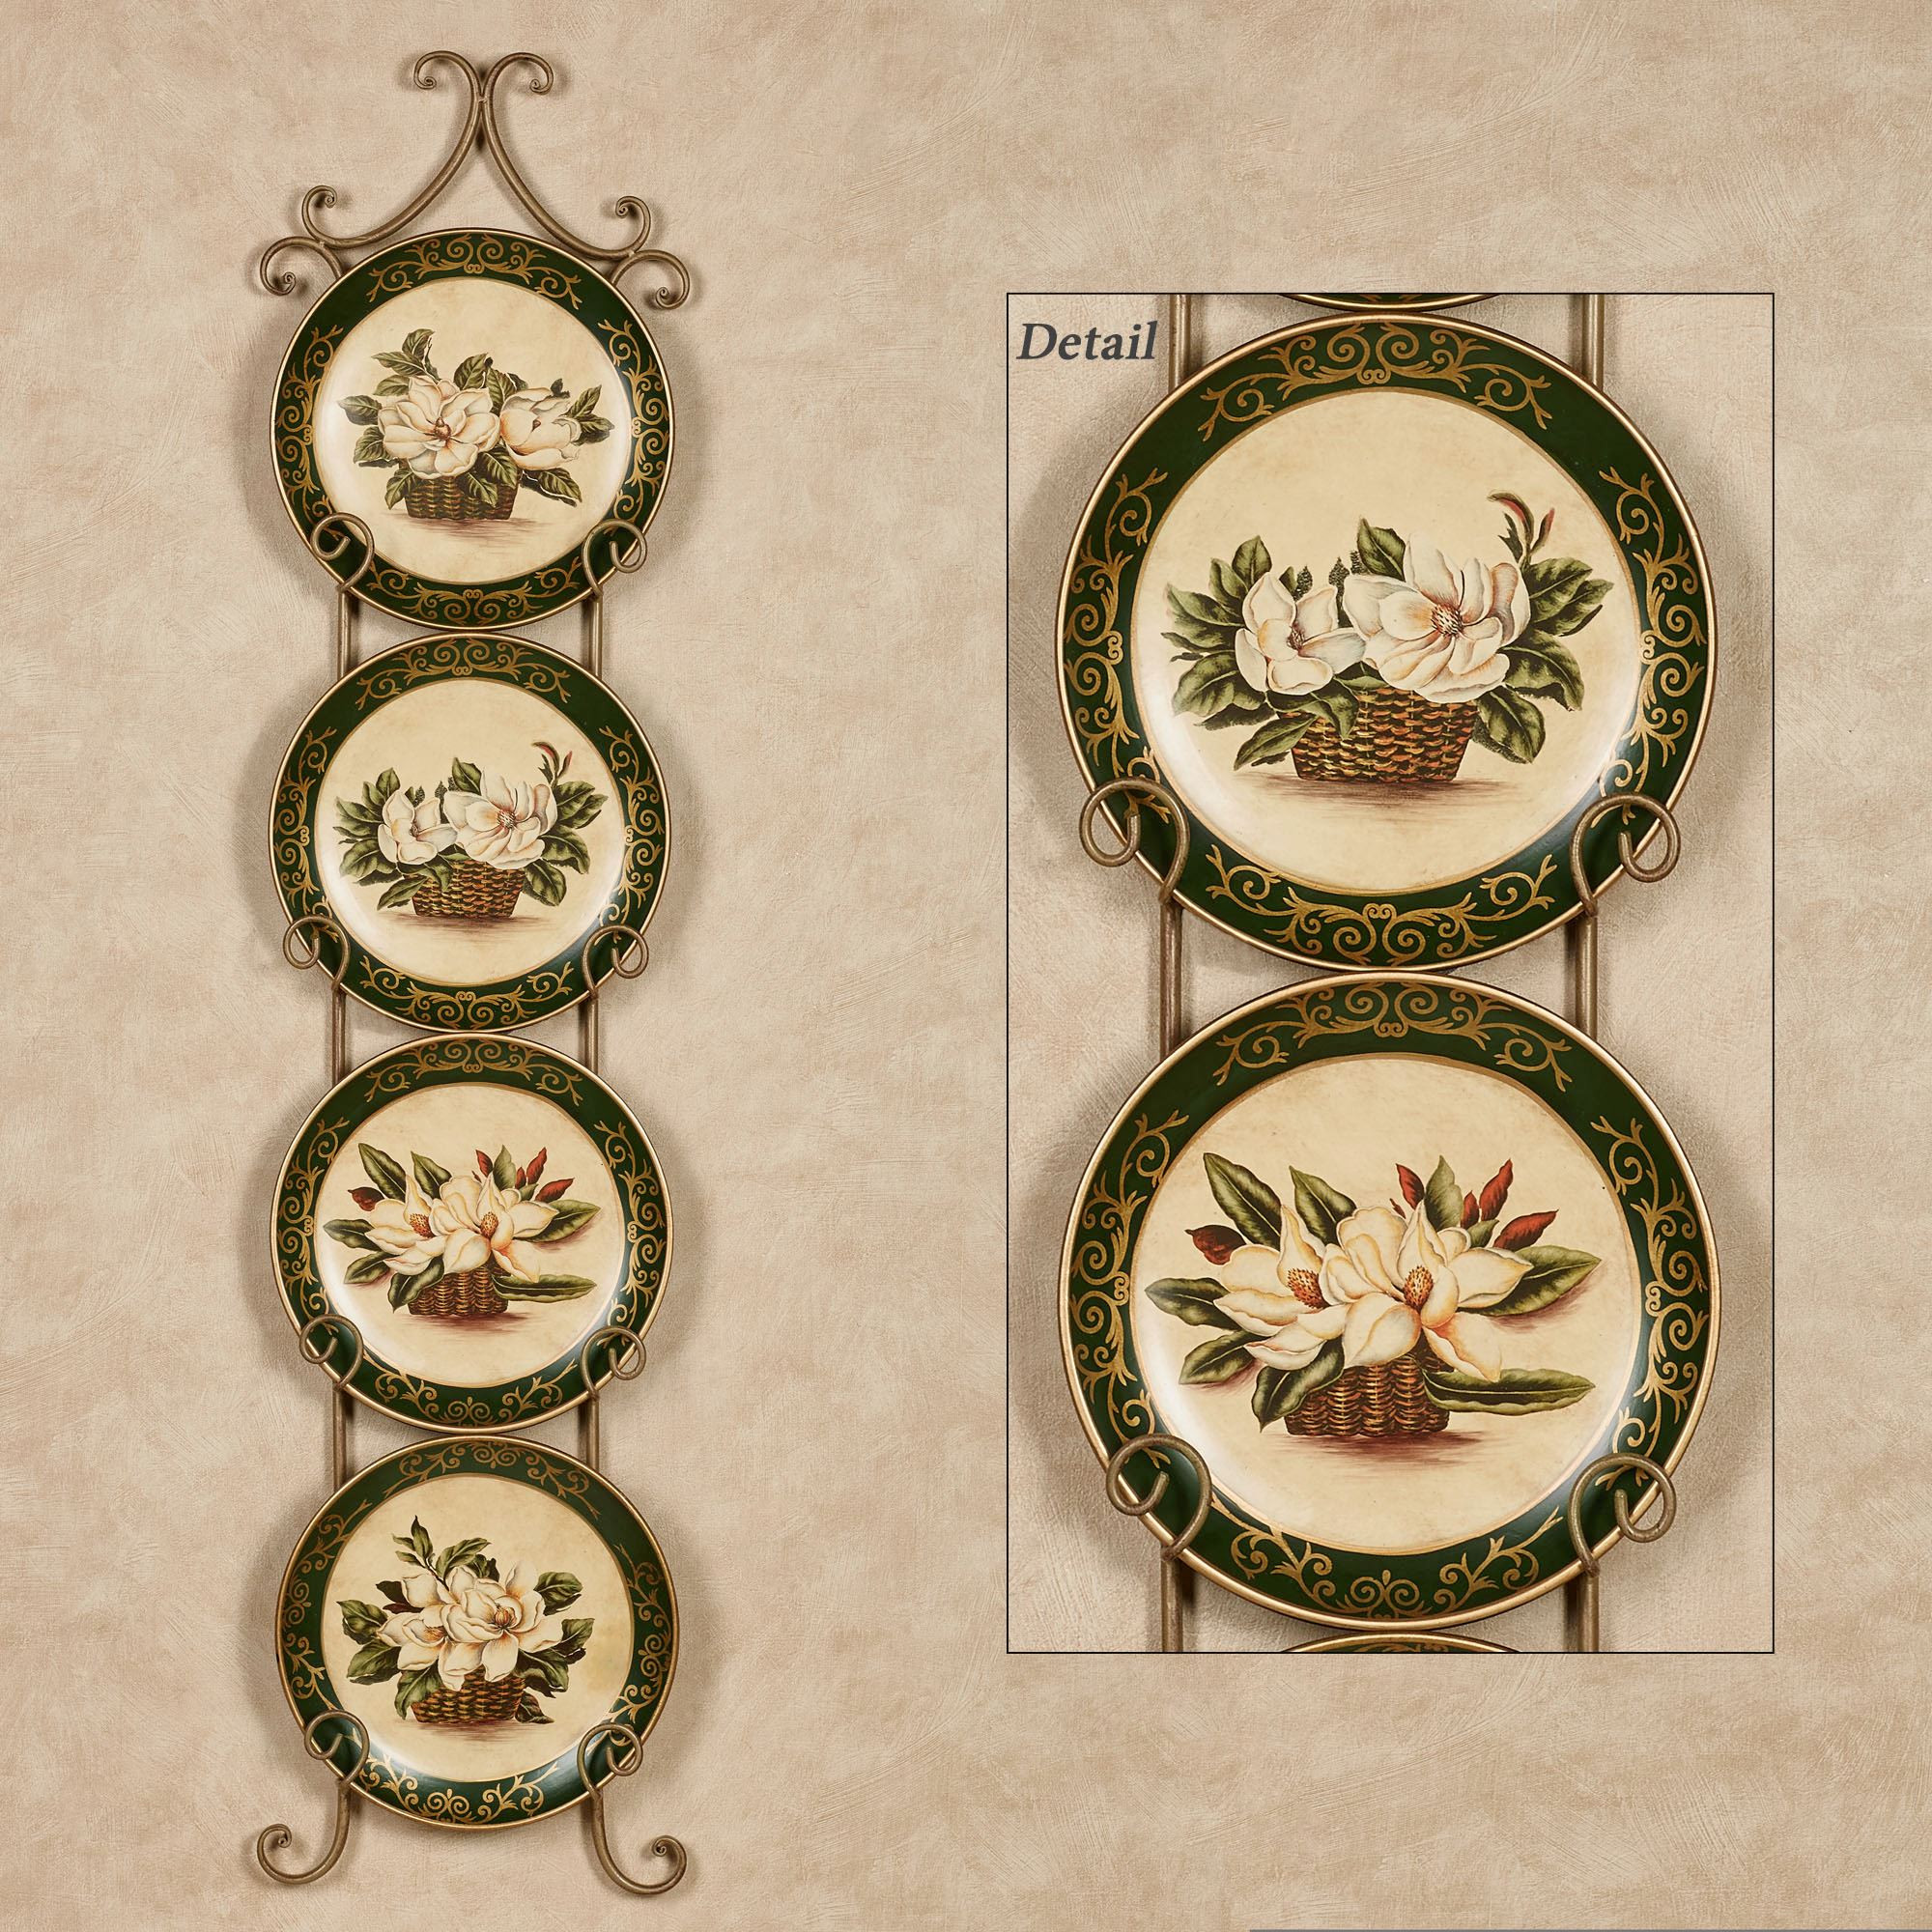 Decorative Plates For Kitchen Wall Inspirational Magnolia Floral Decorative Plate Set Of Decorative Plates For Kitchen Wall 